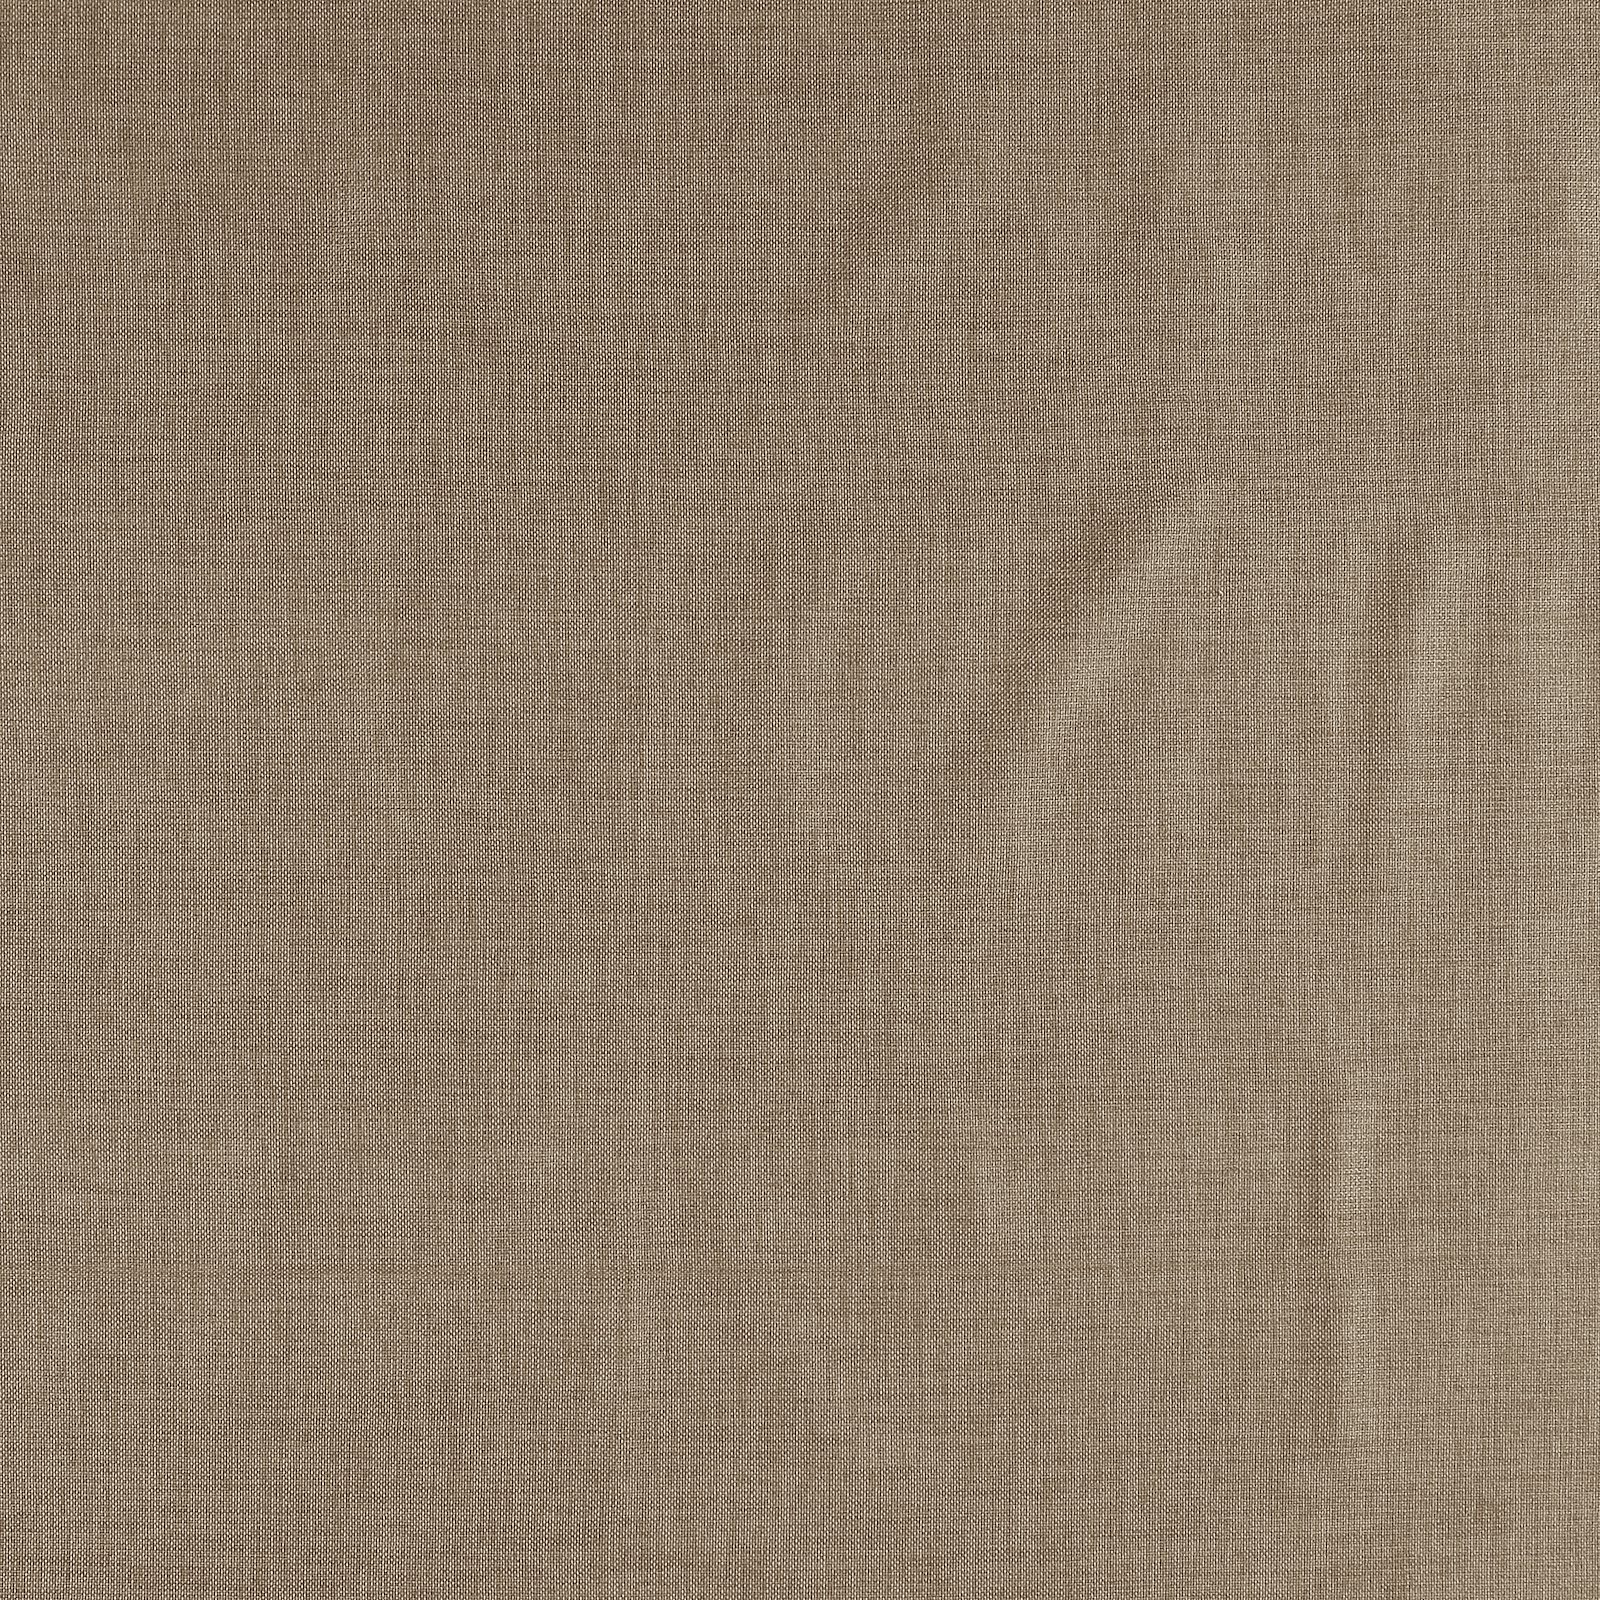 Upholstery fabric light walnut 823808_pack_solid